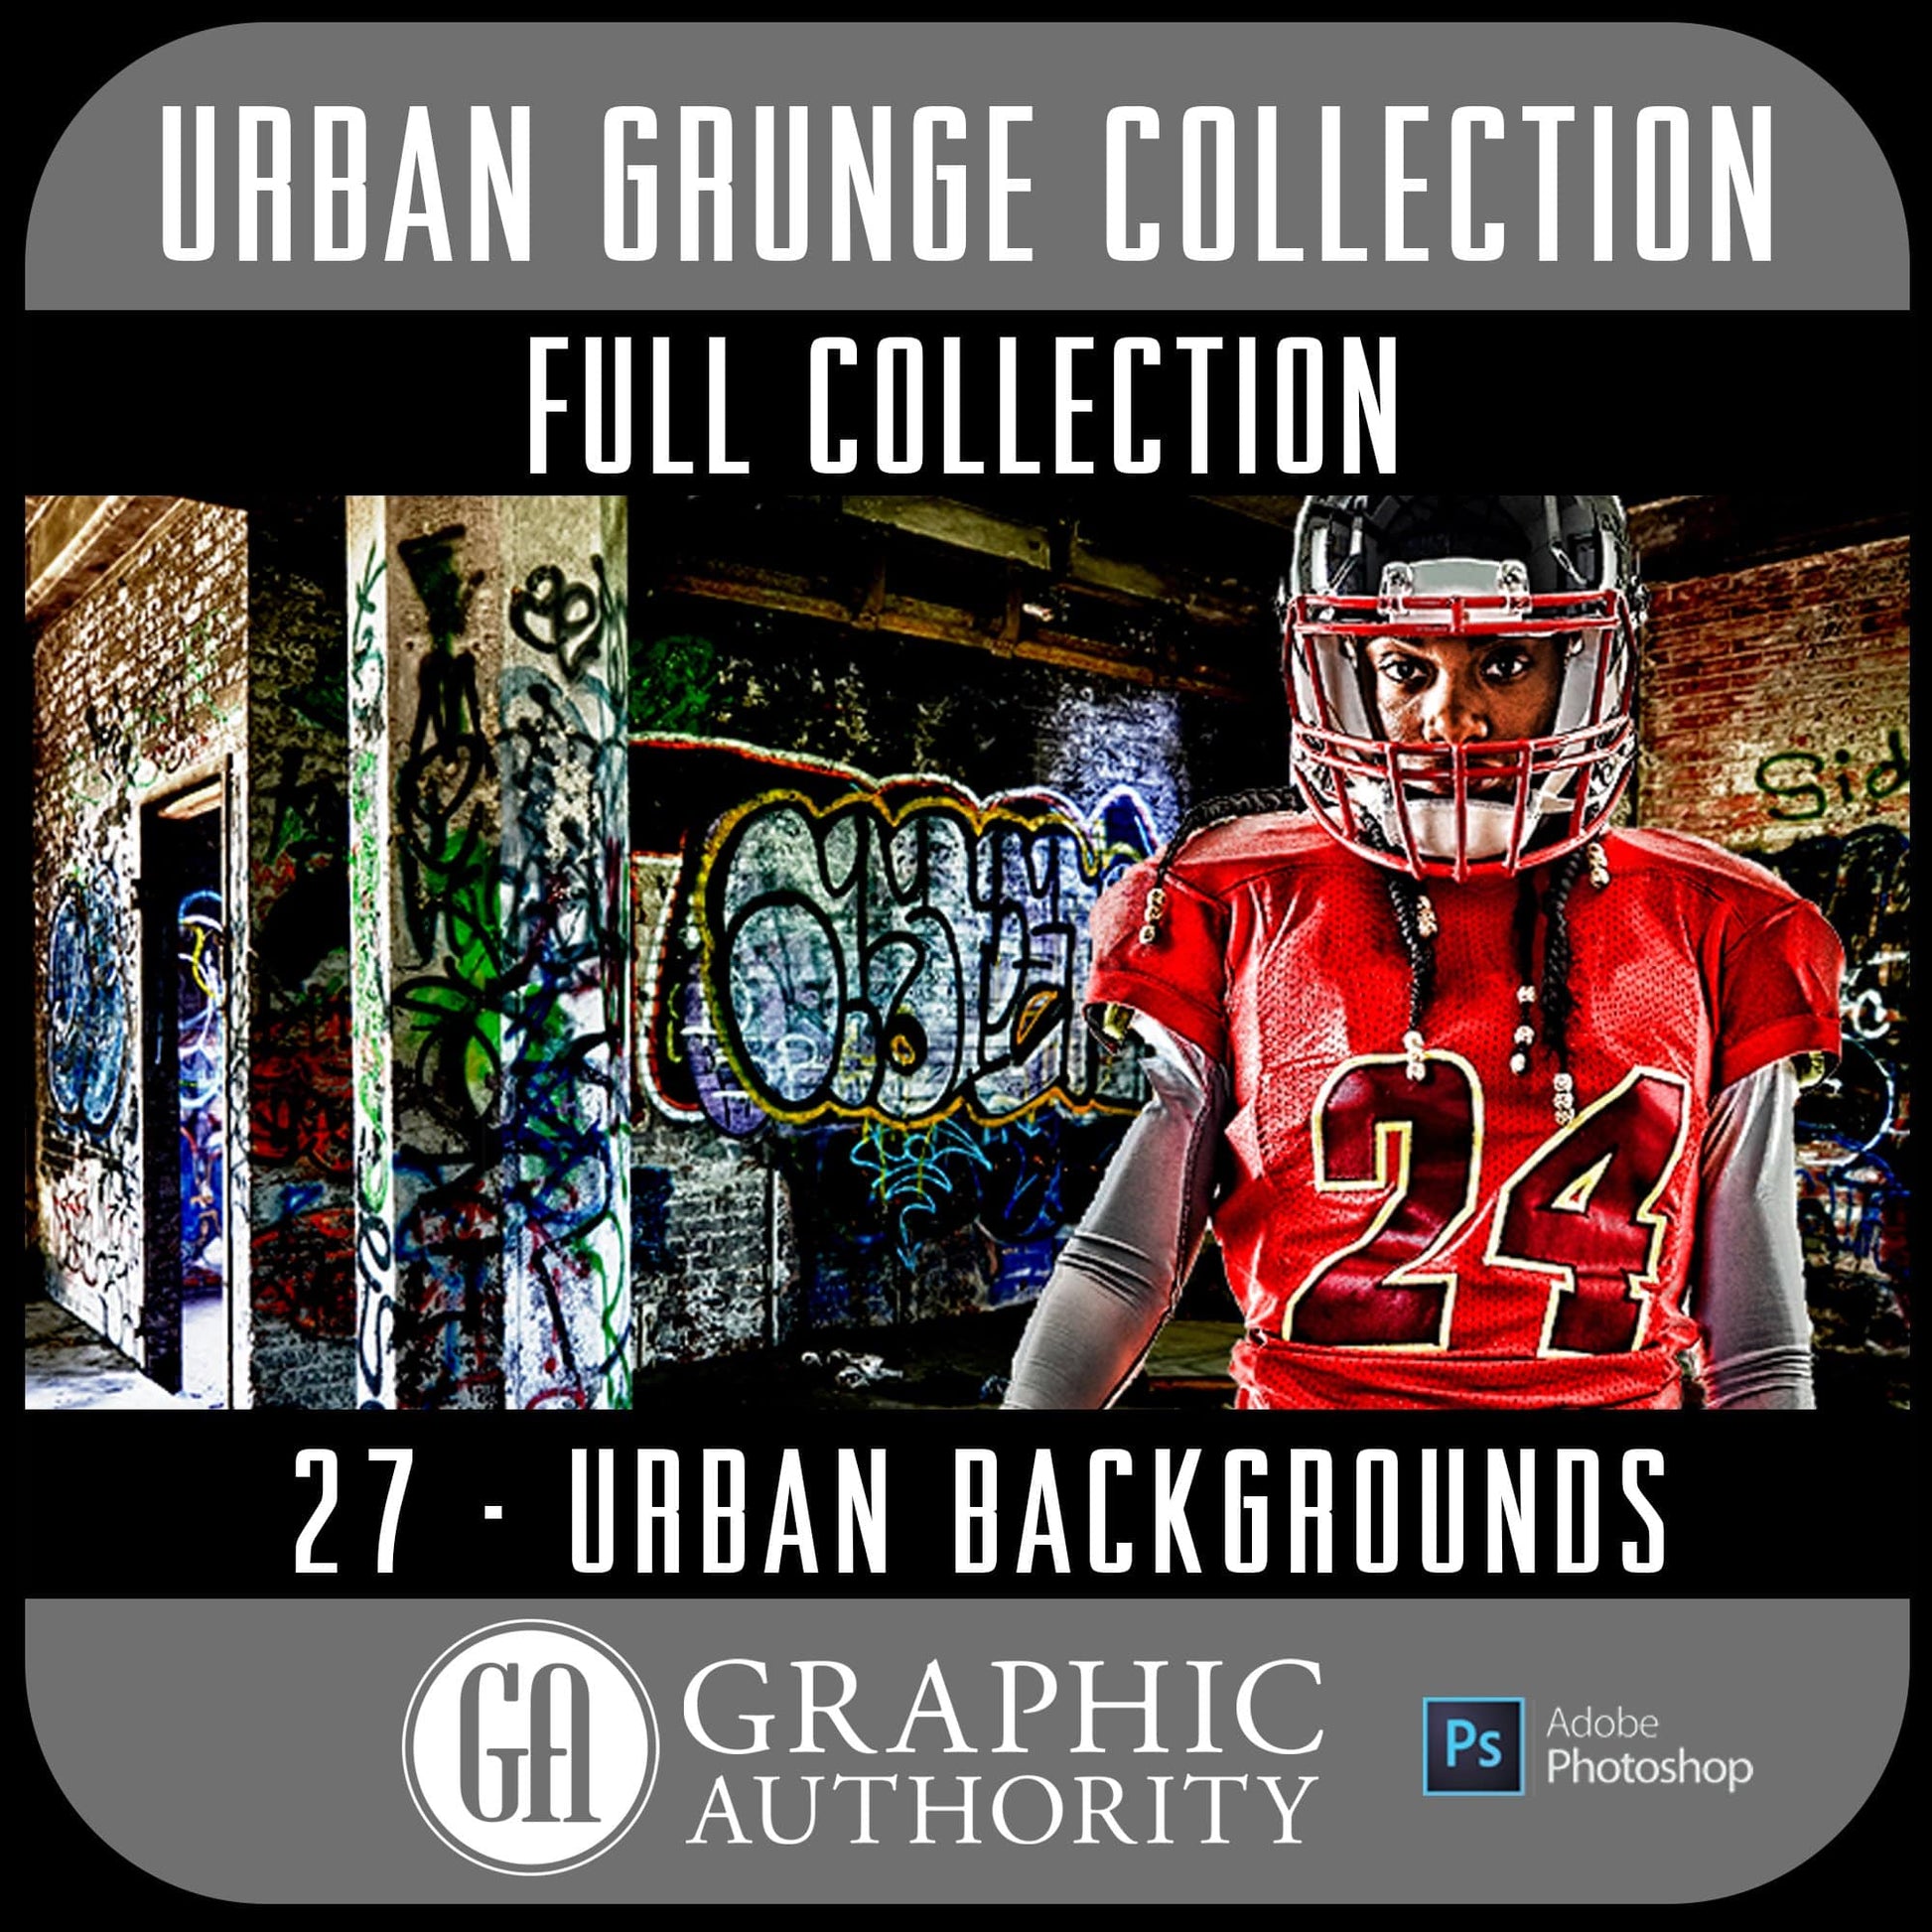 Urban Grunge - Backgrounds - Full Collection-Photoshop Template - Graphic Authority